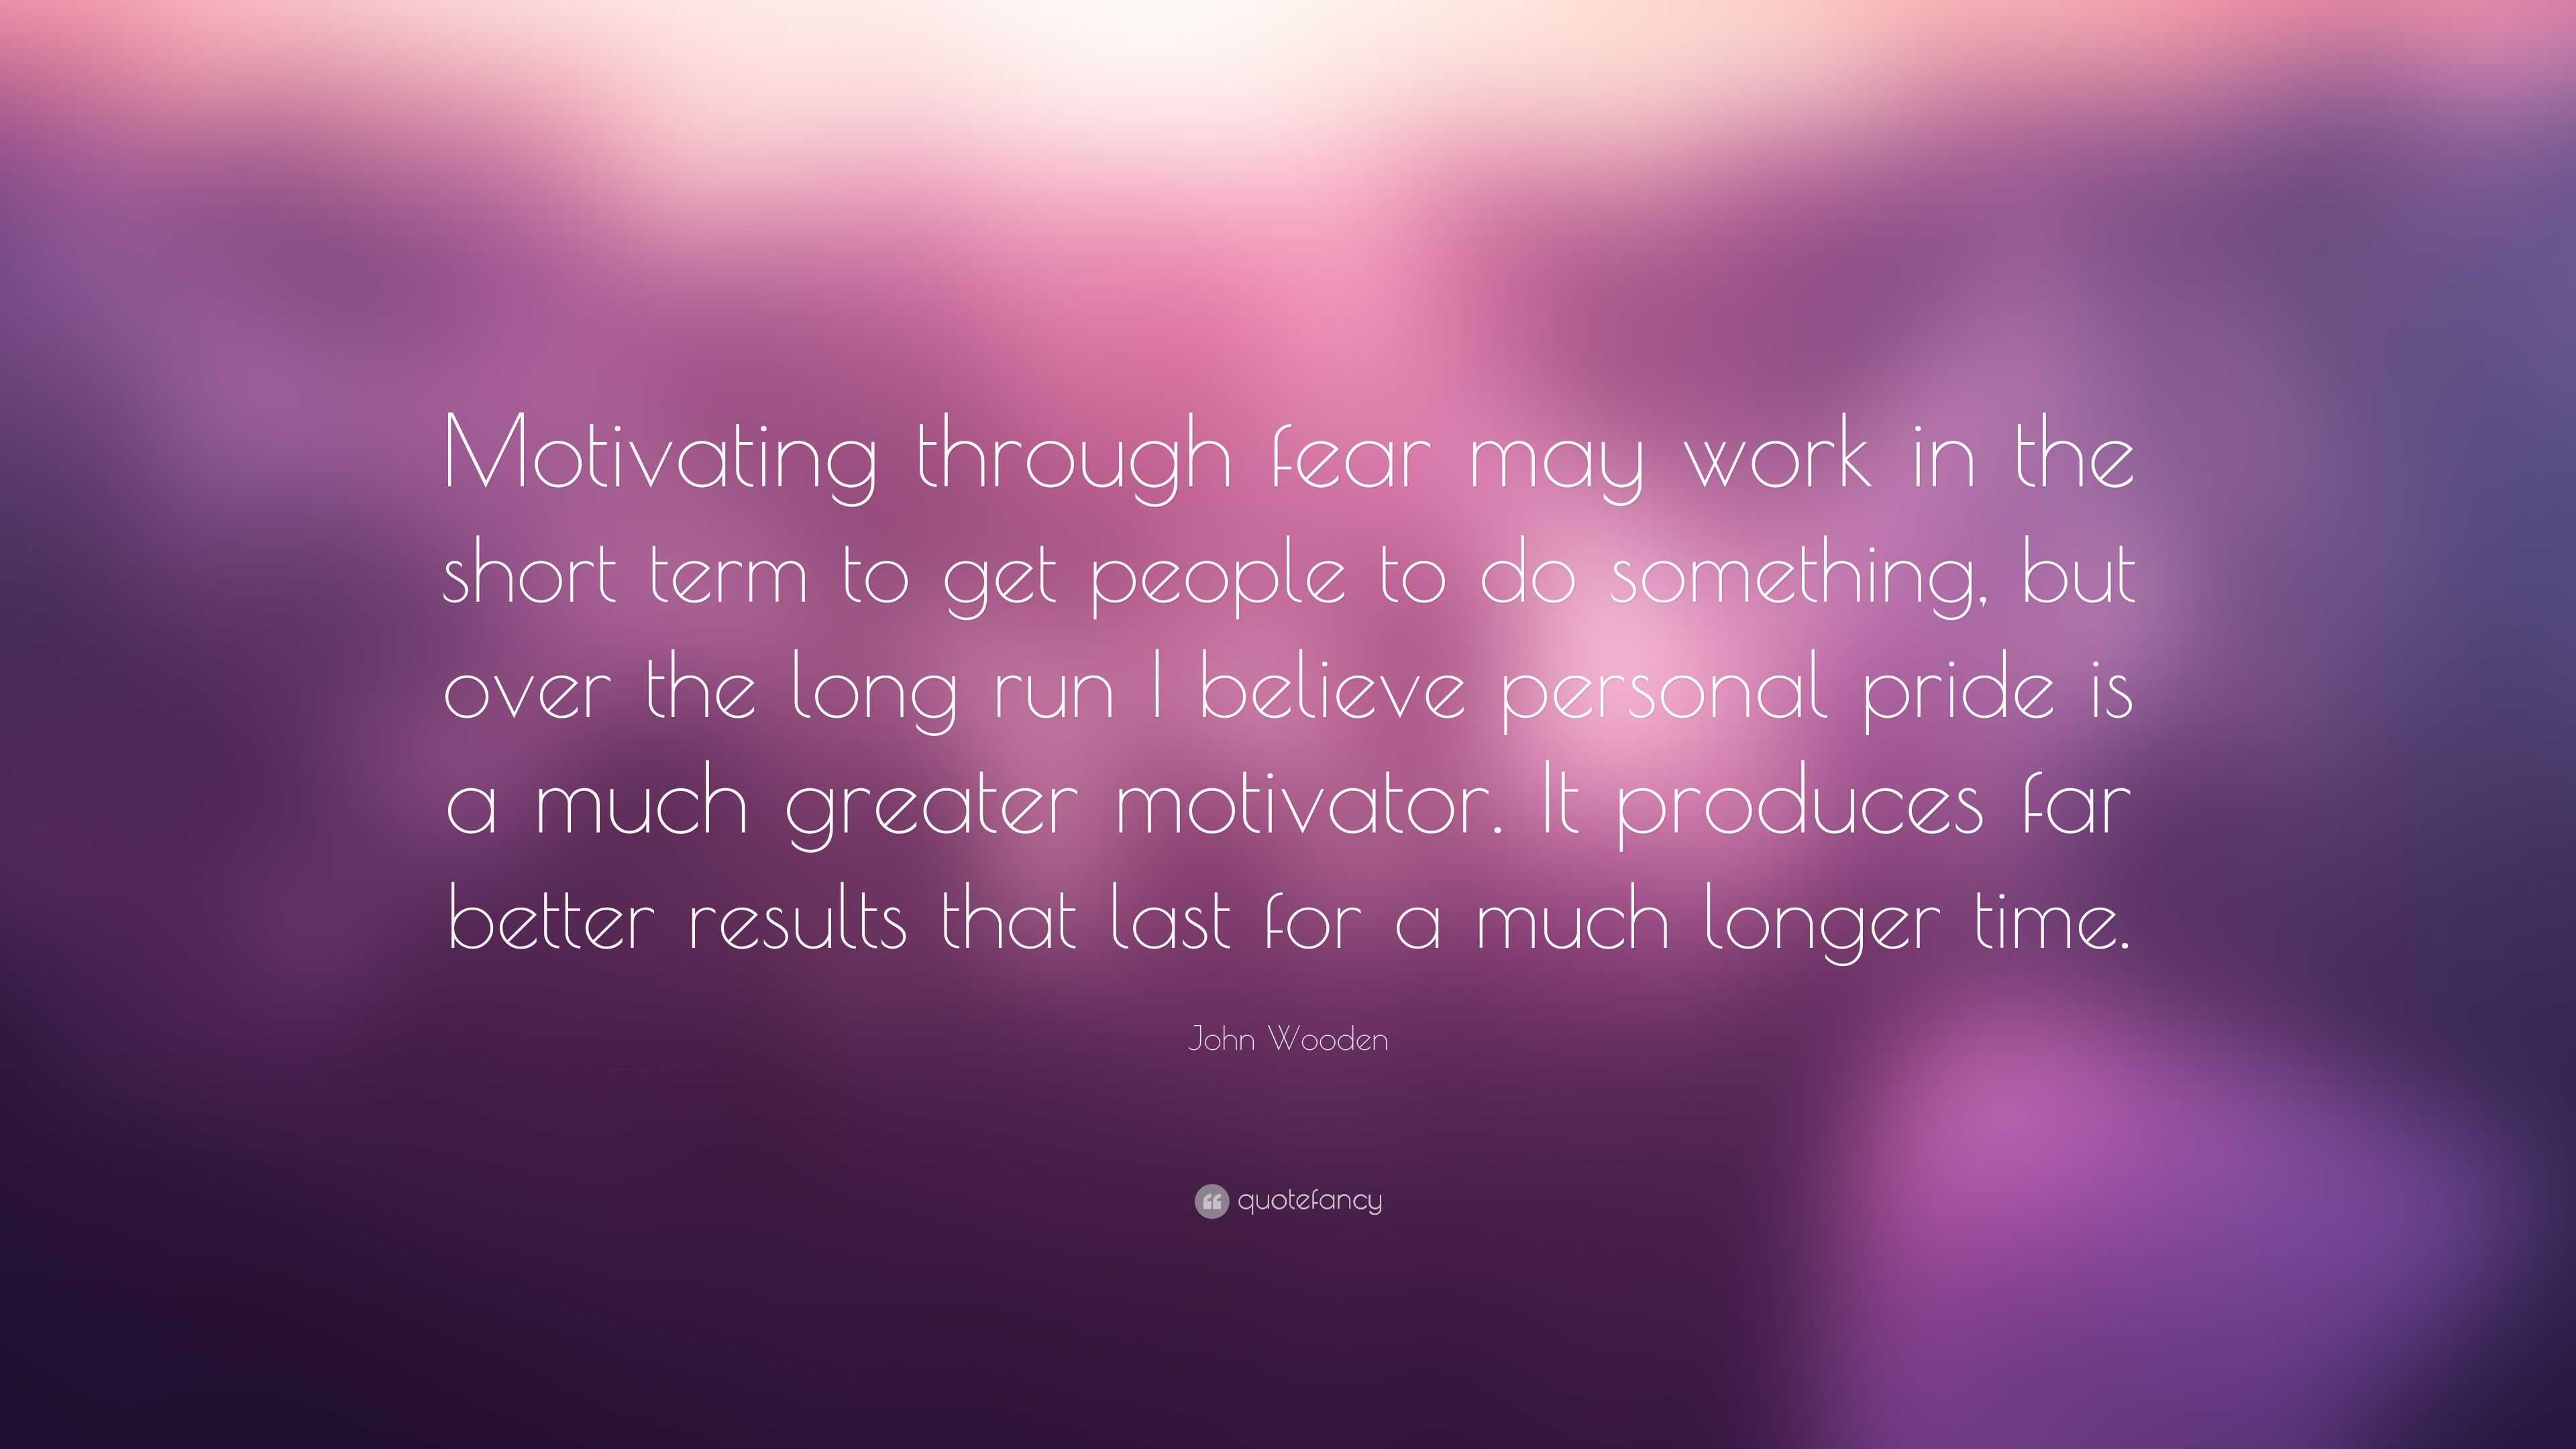 John Wooden Quote: “Motivating through fear may work in the short term ...